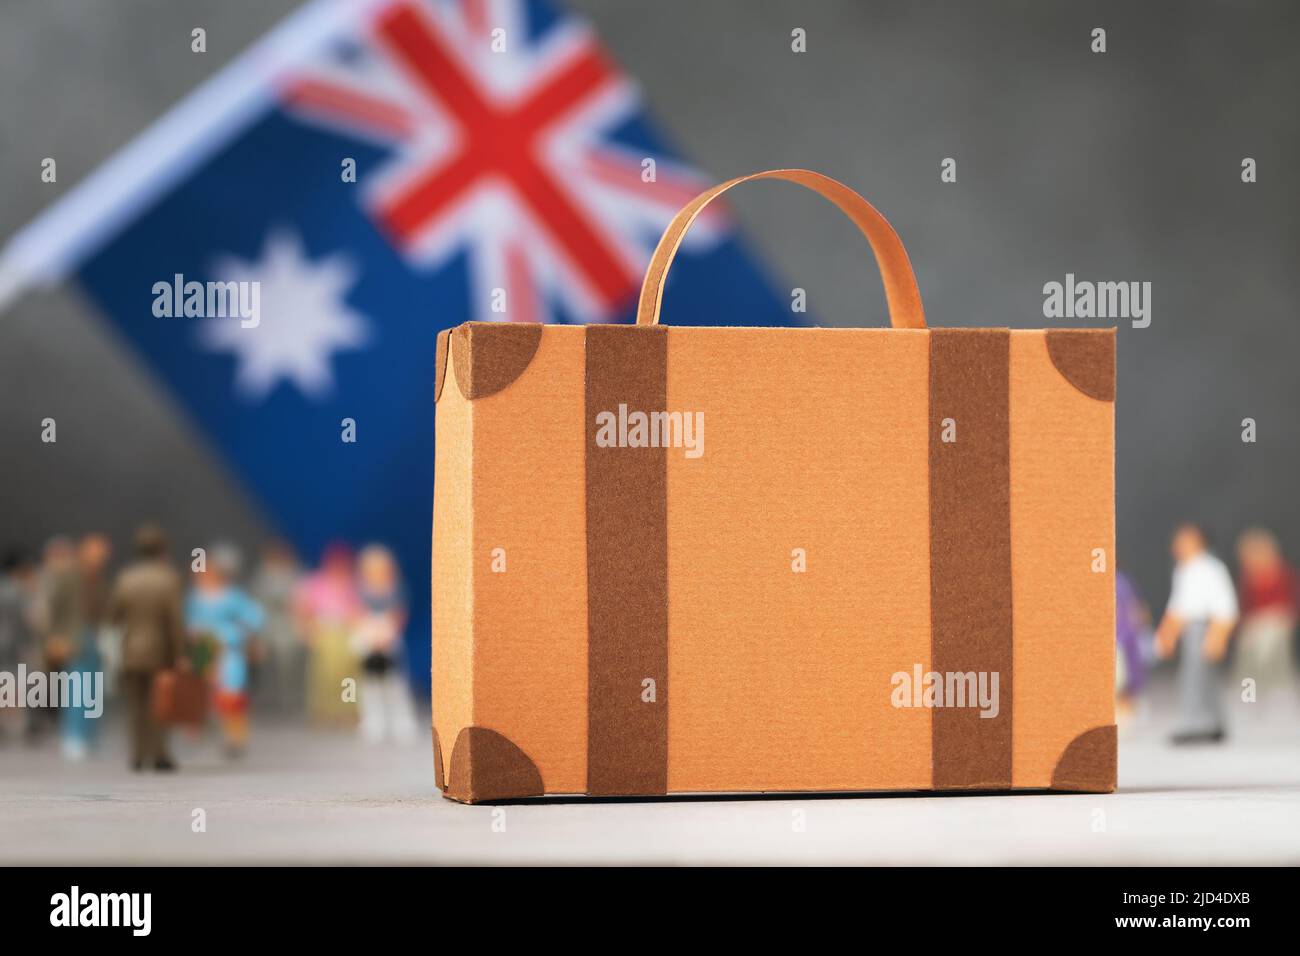 Cardboard suitcase, plastic toy people and a flag on an abstract background, a concept on the theme of moving or immigration to Australia Stock Photo